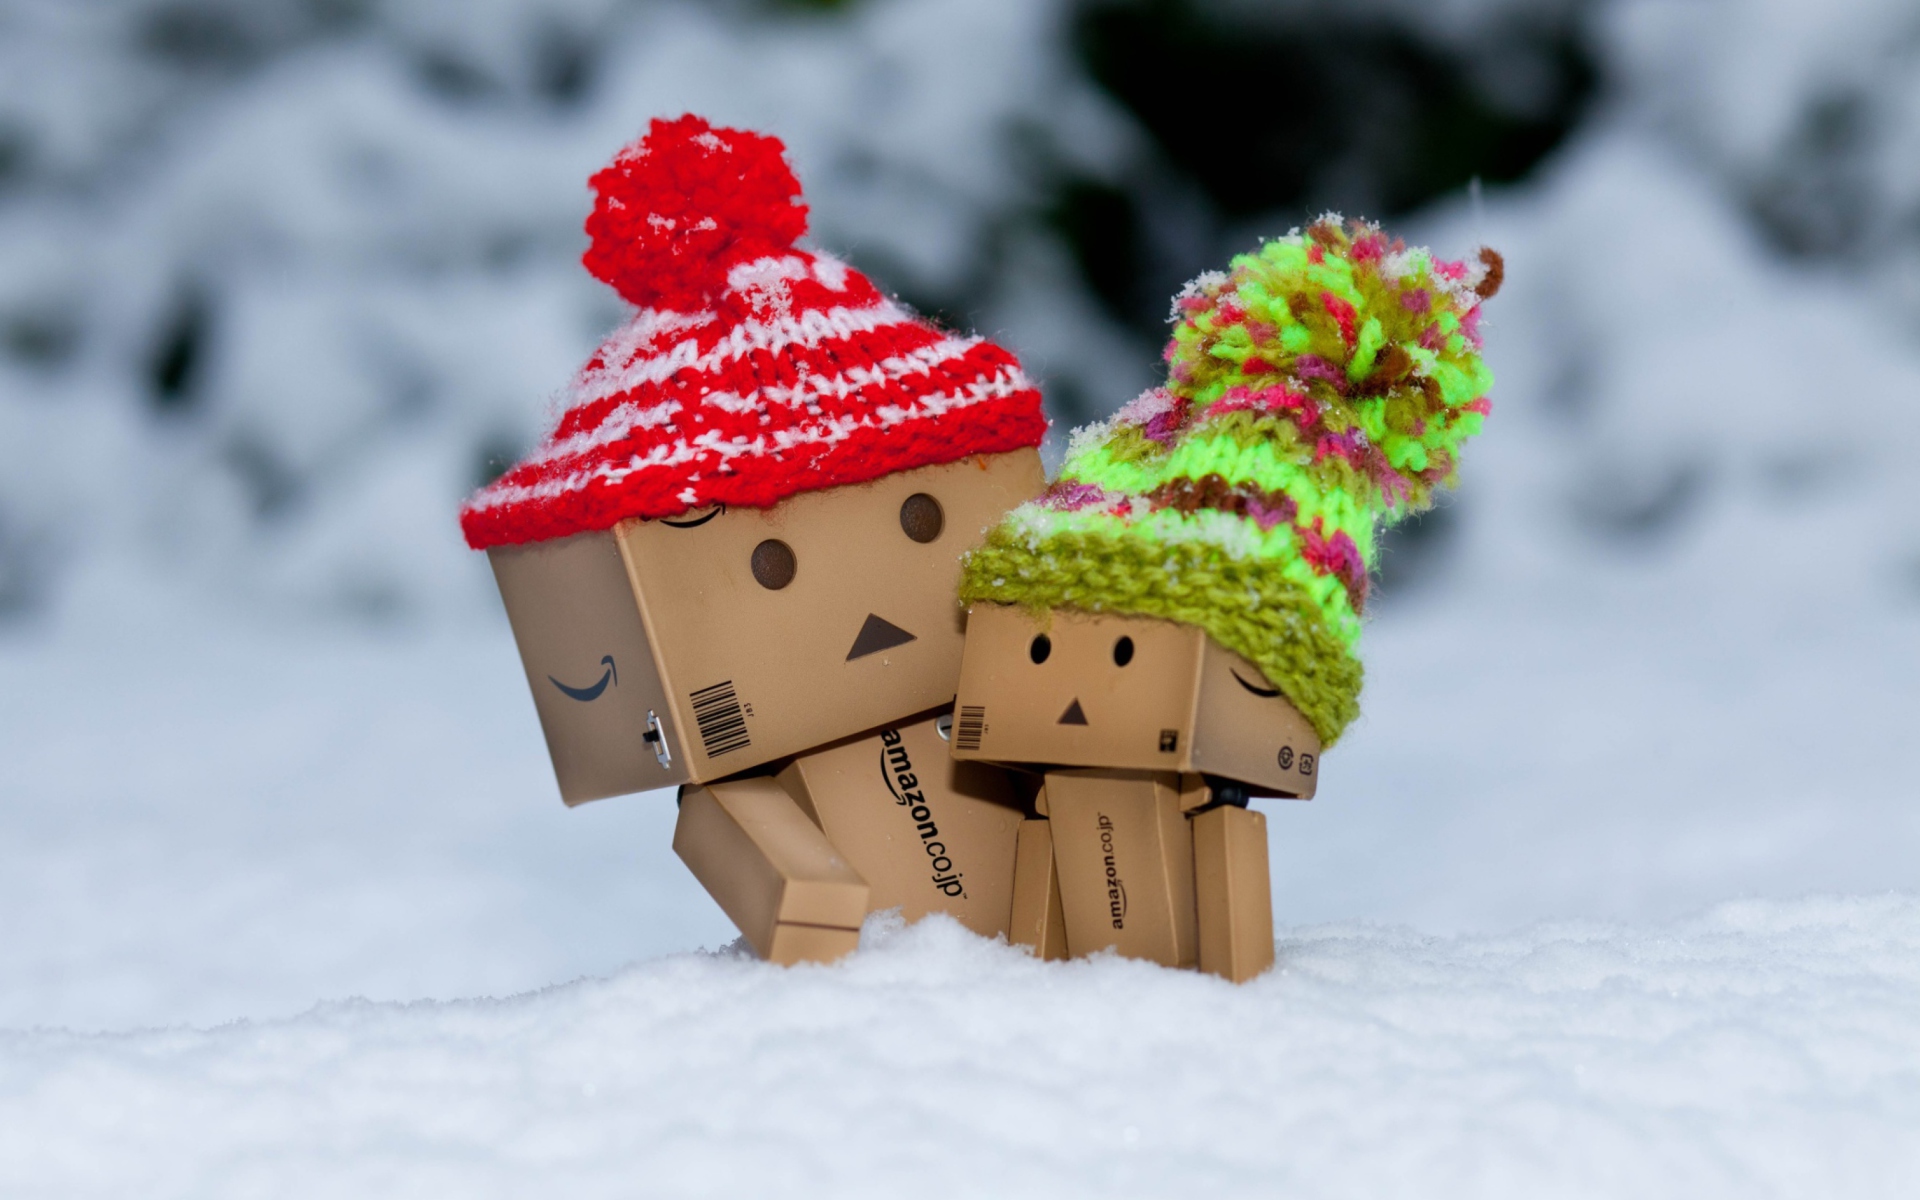 Danbo Is Scared By So Much Snow wallpaper 1920x1200